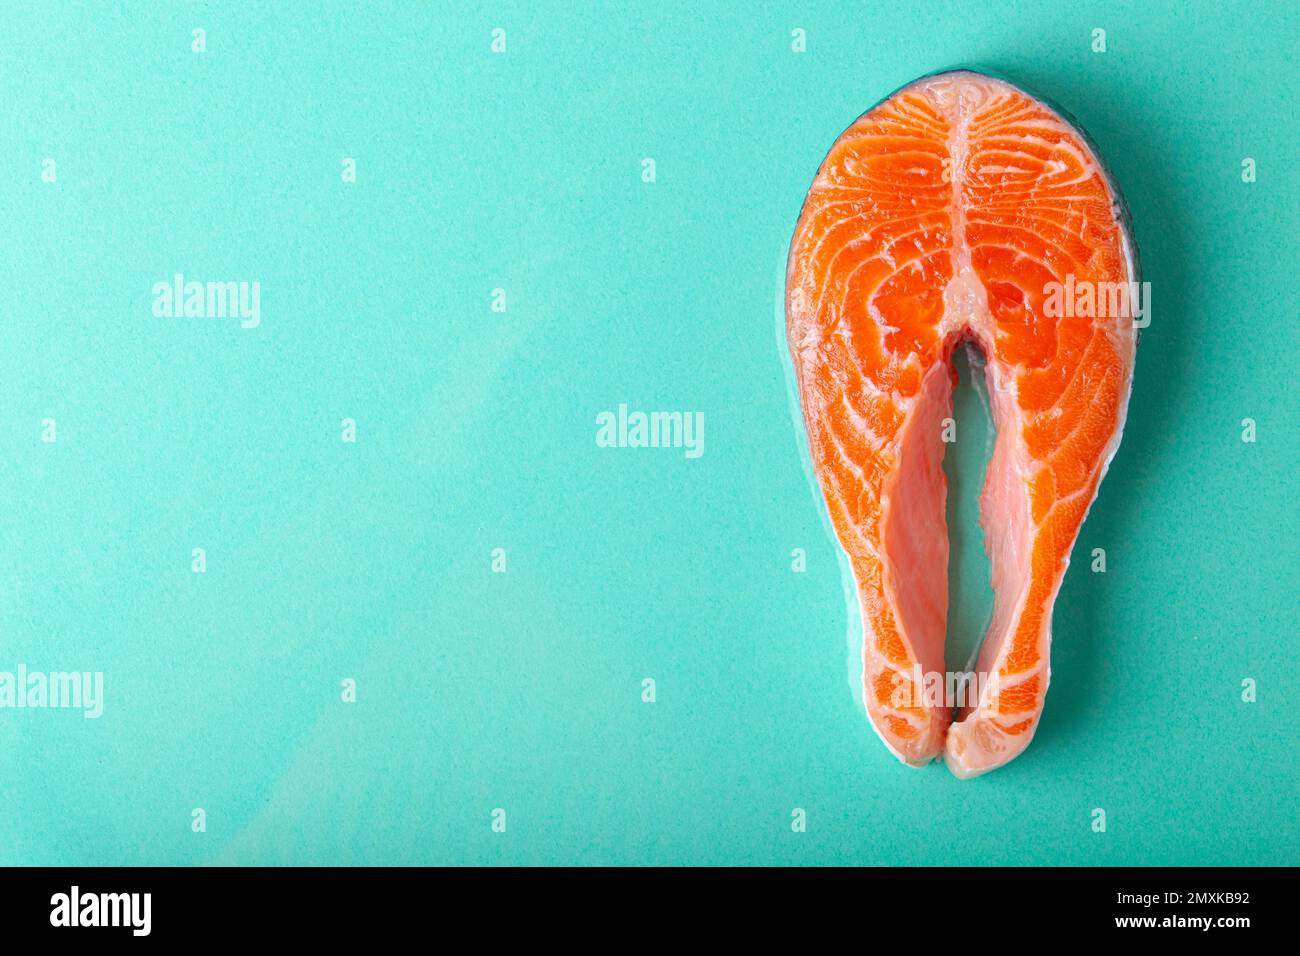 Uncooked raw fresh fish salmon steak top view on blue clean background from above, delicacy healthy fish eating and nutrition concept flat lay space f Stock Photo